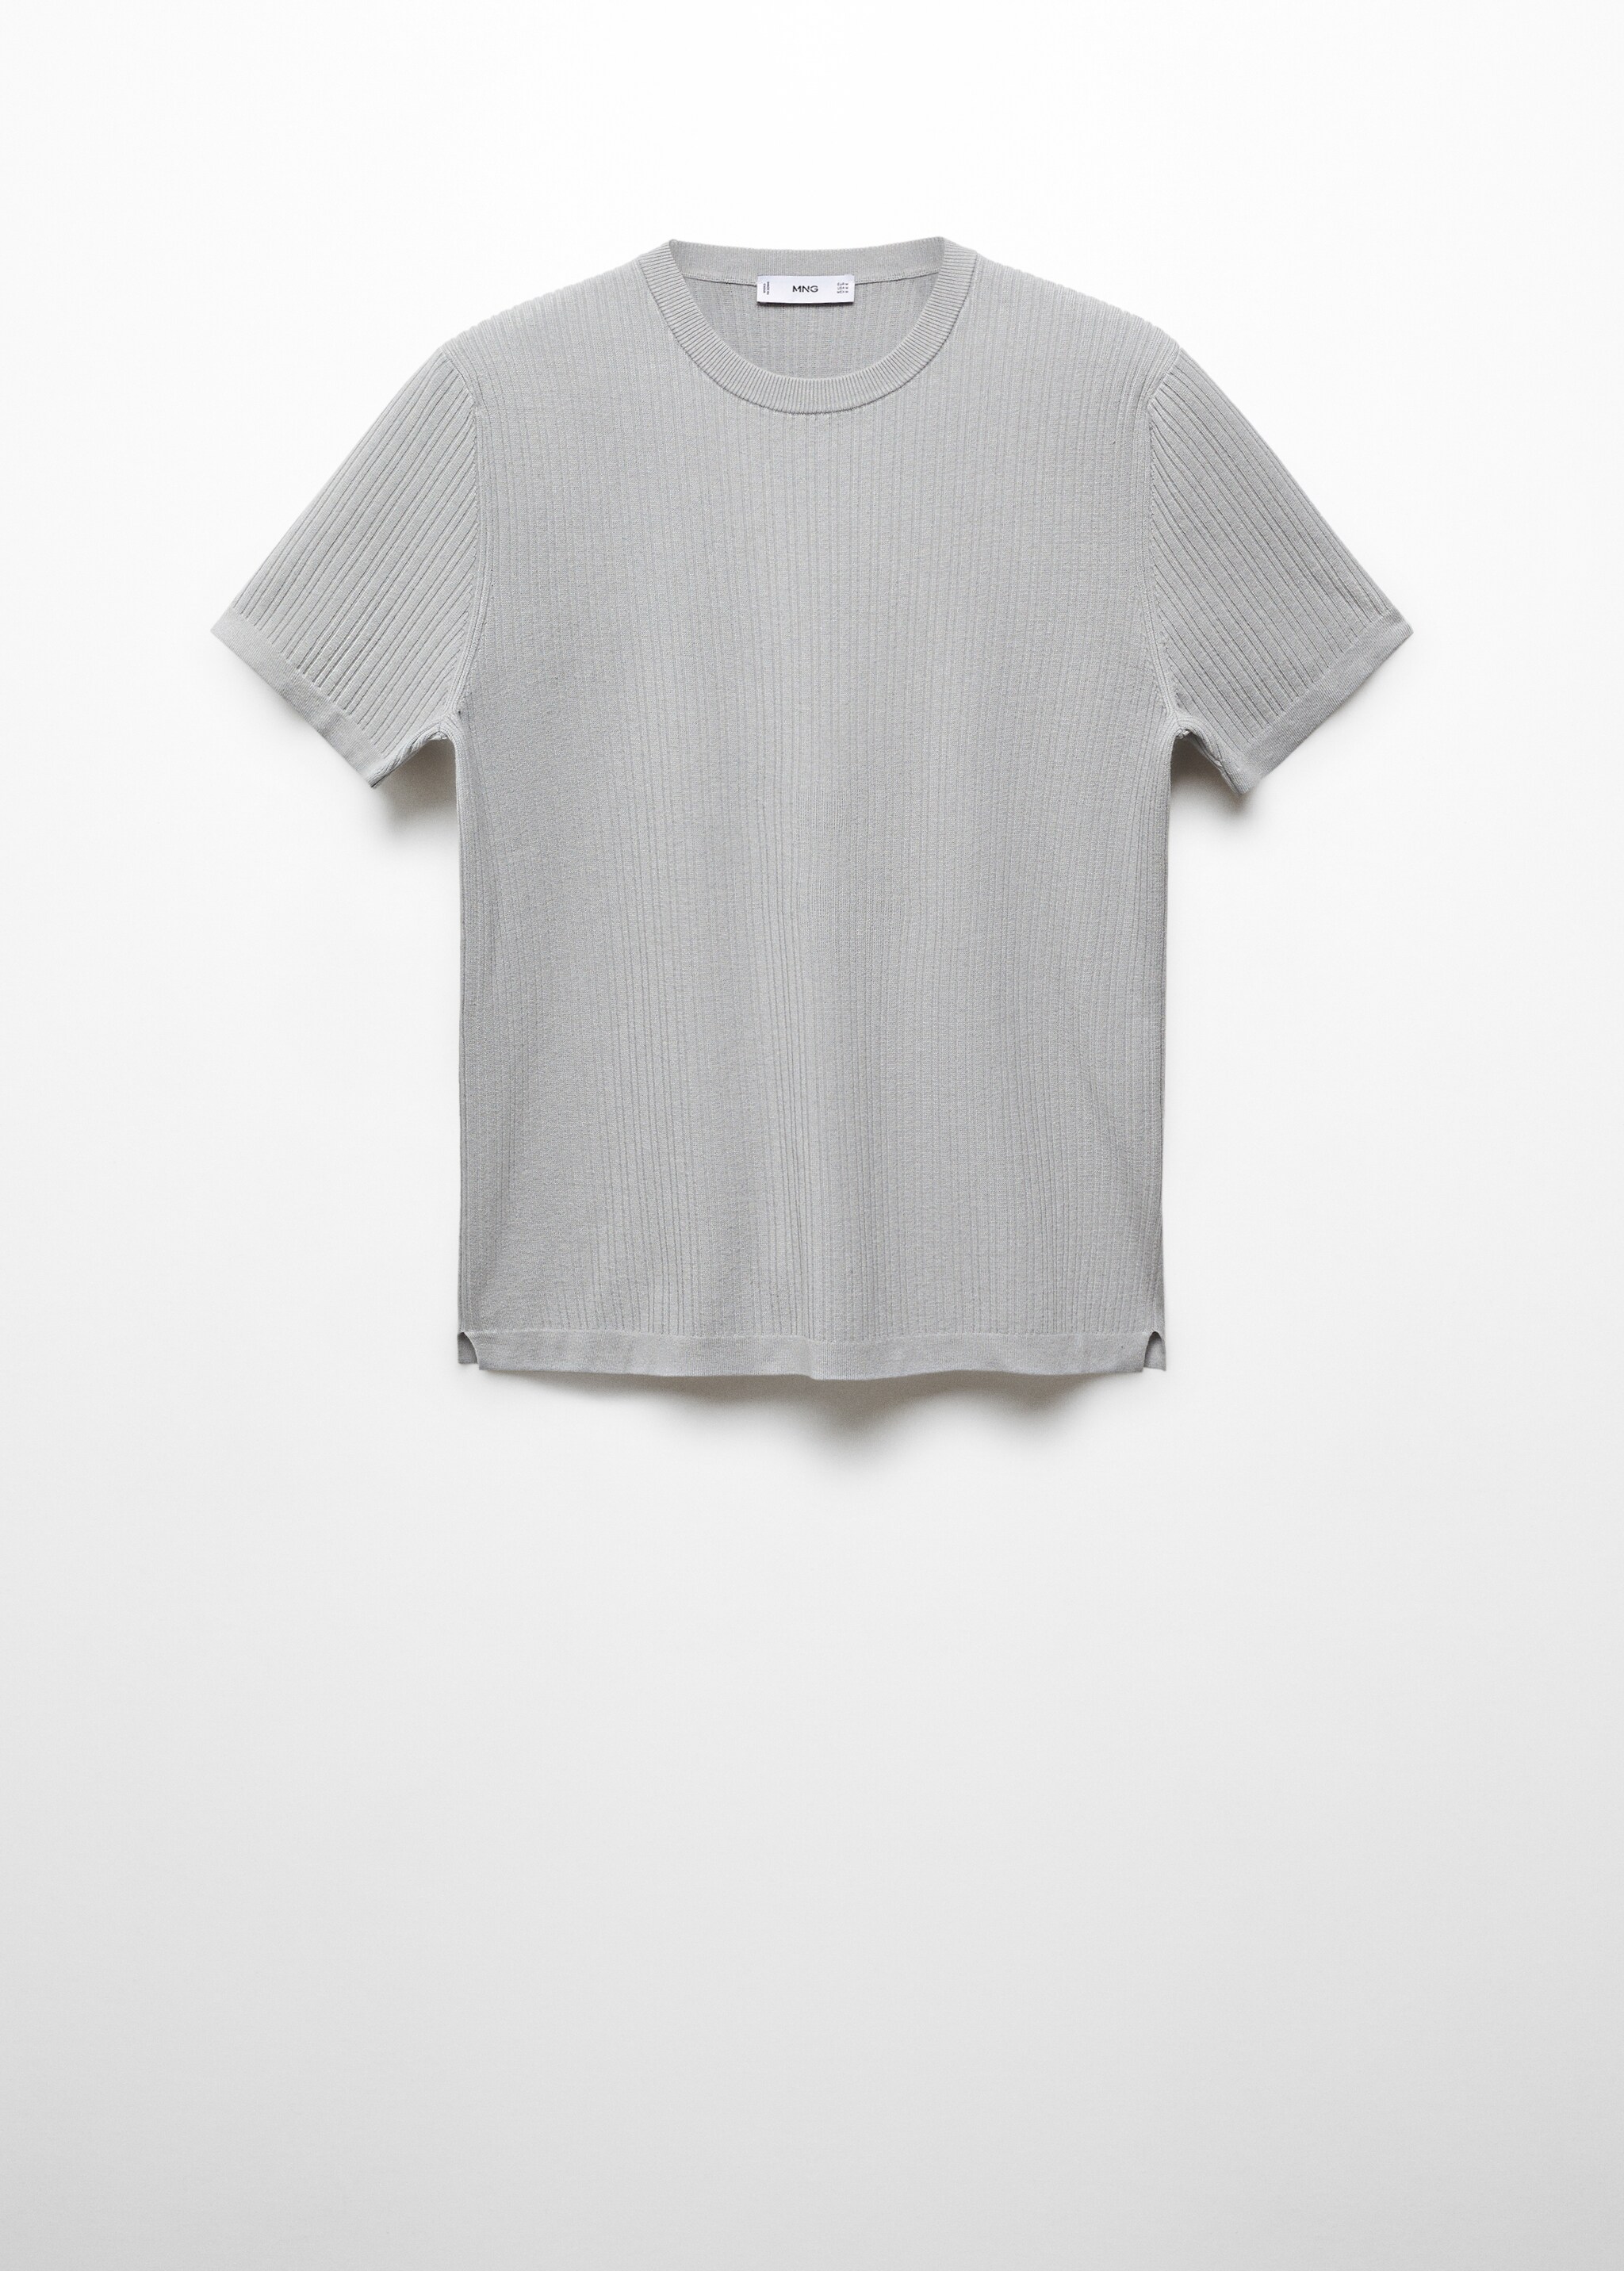 Ribbed  knit t-shirt - Article without model